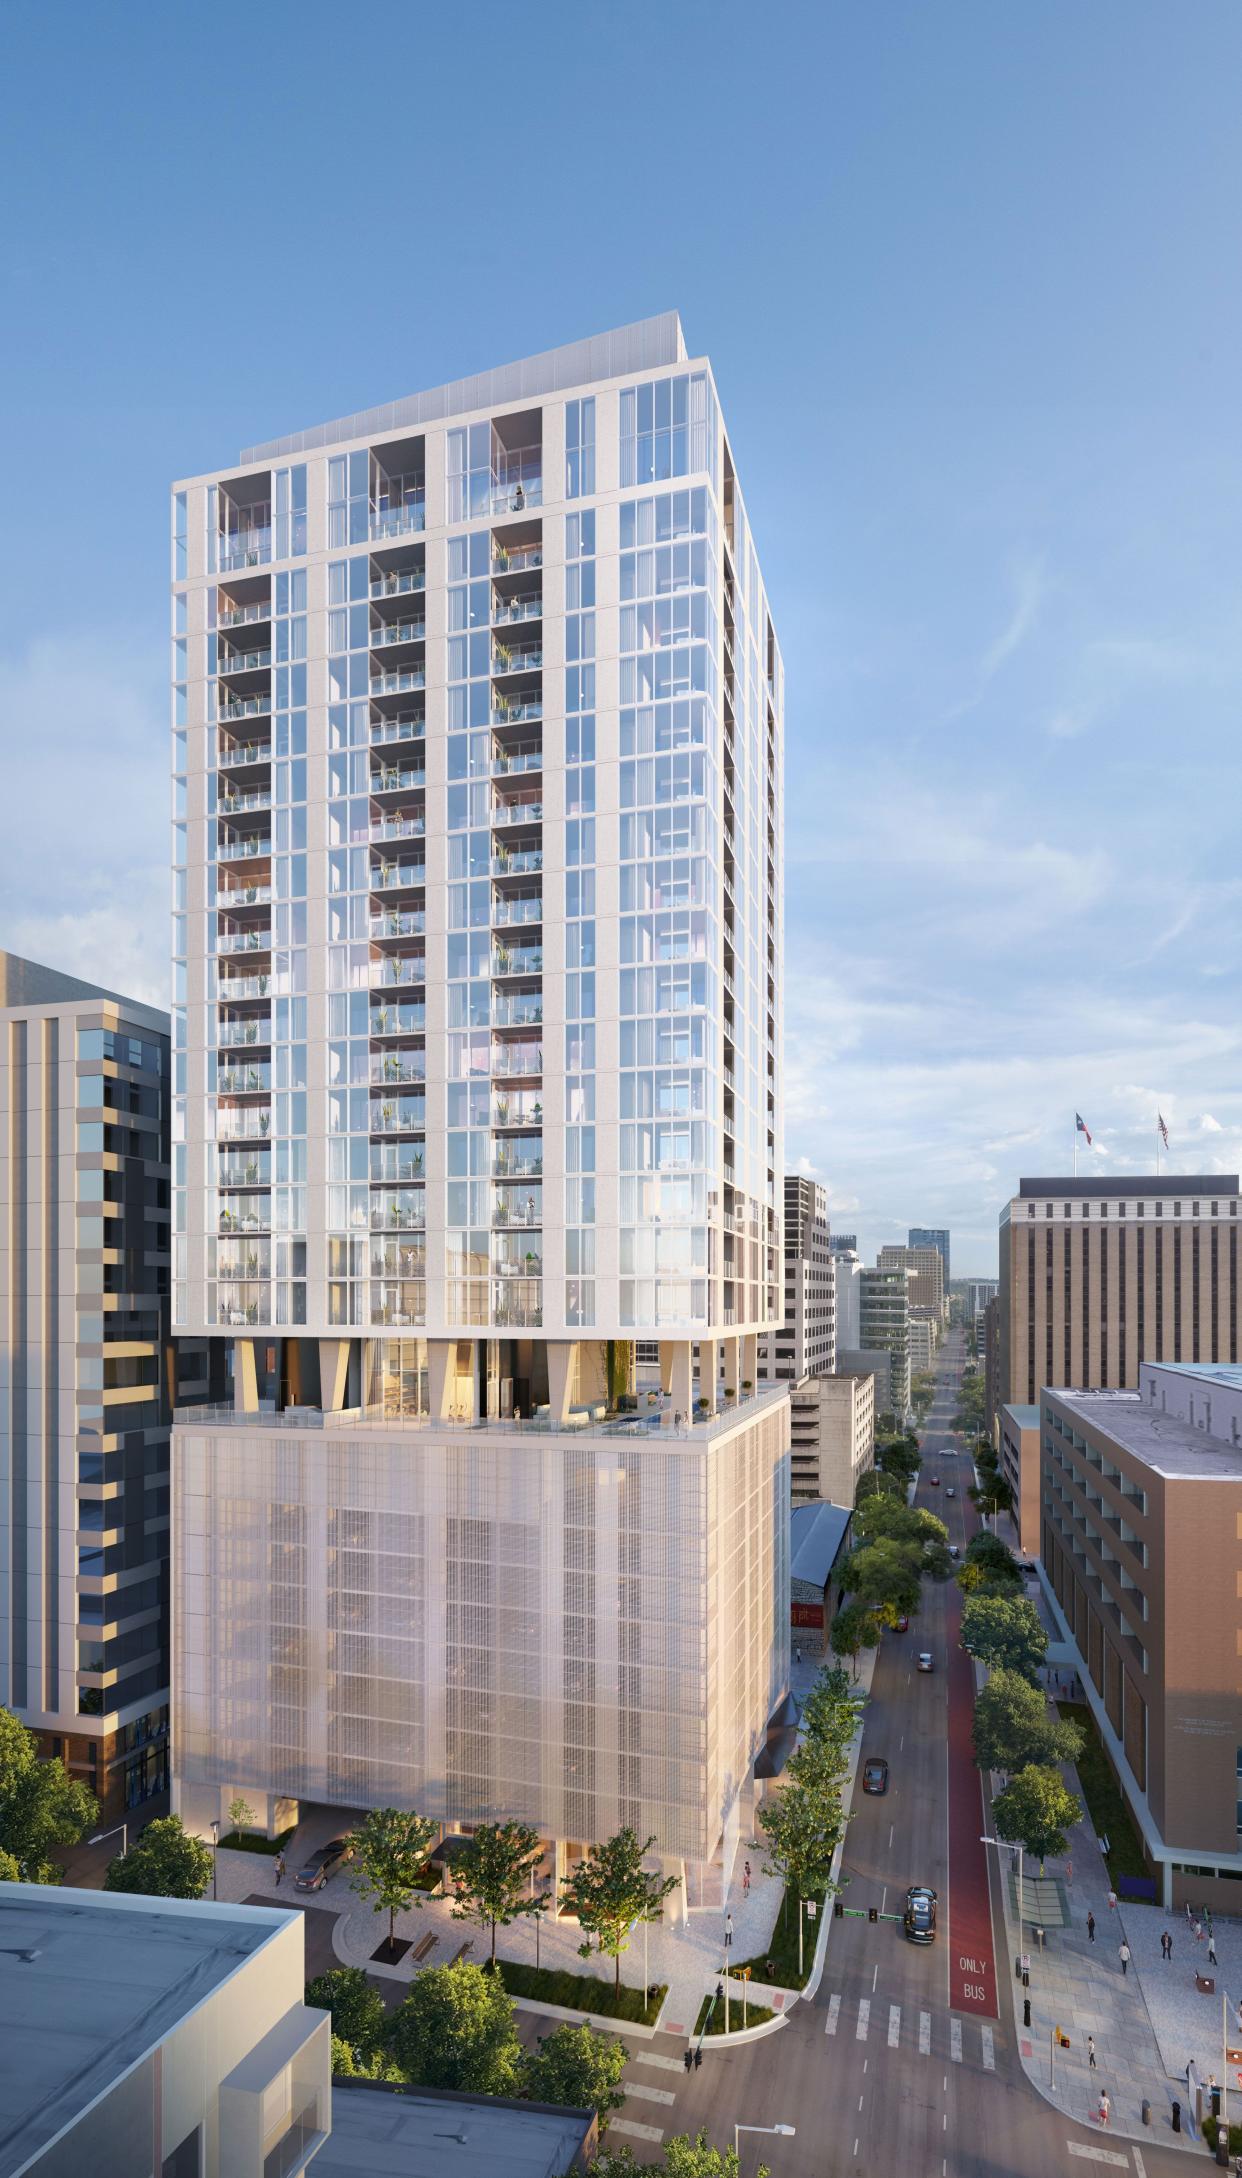 New towers to downtown Austin's skyline include Sixth and Guadalupe, which at 66 stories is the tallest high-rise to date. Other projects include Hanover Brazos Street and the Linden, shown in this rendering.